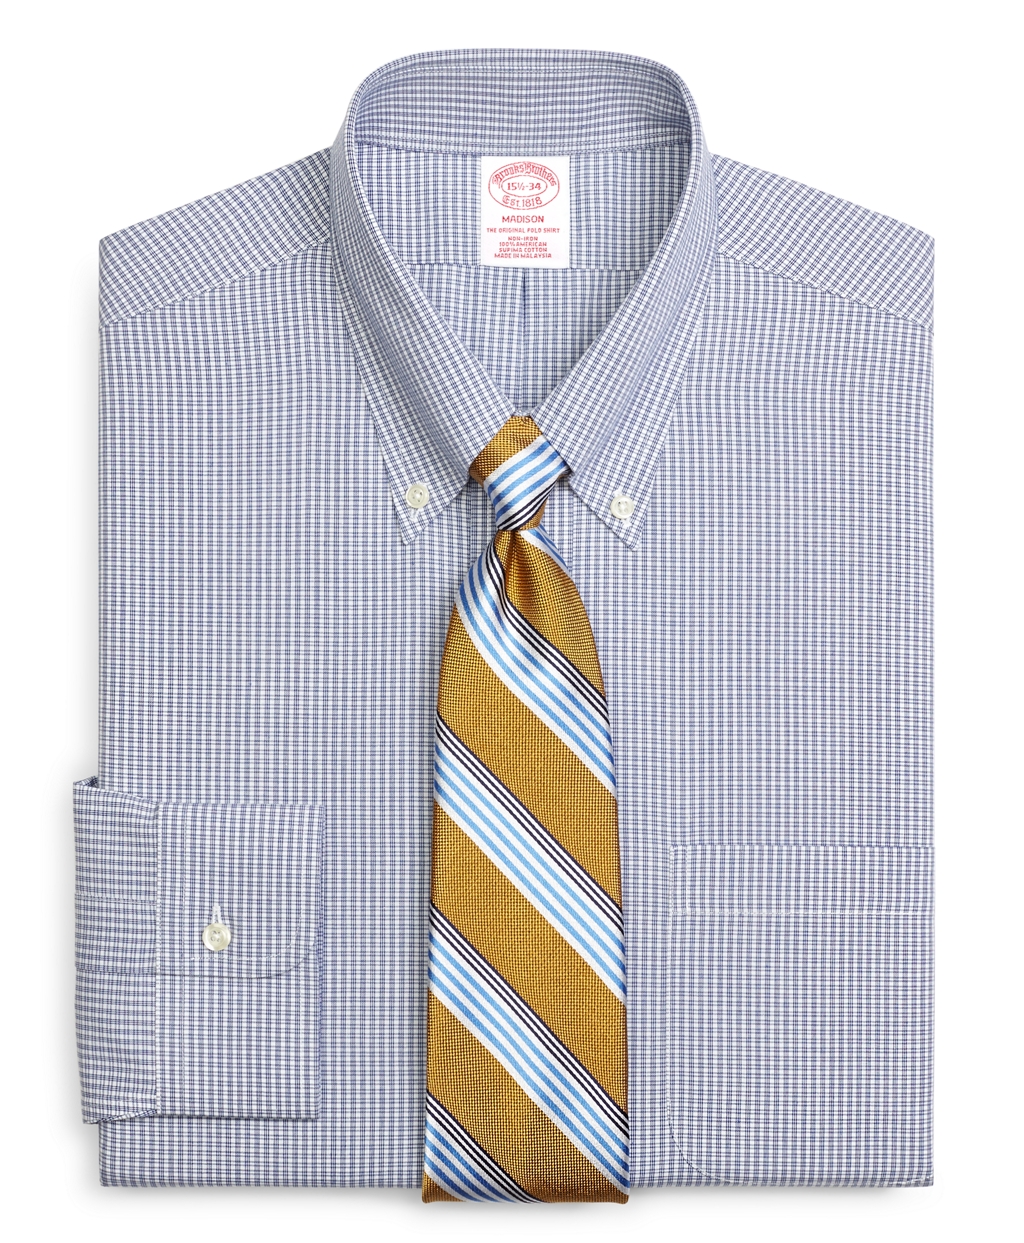 This now-$49 shirt is available in five different colors and four different fits (Photo via Brooks Brothers)